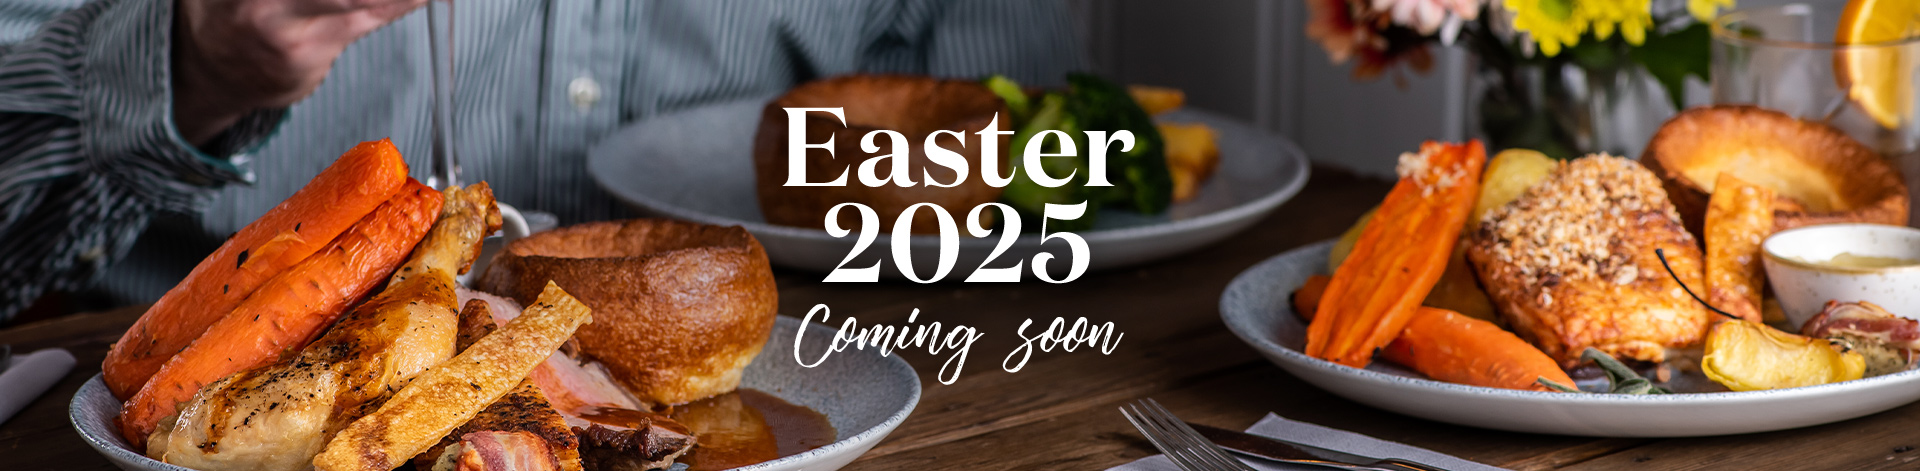 Easter at The Red Lion, Dodleston in Chester